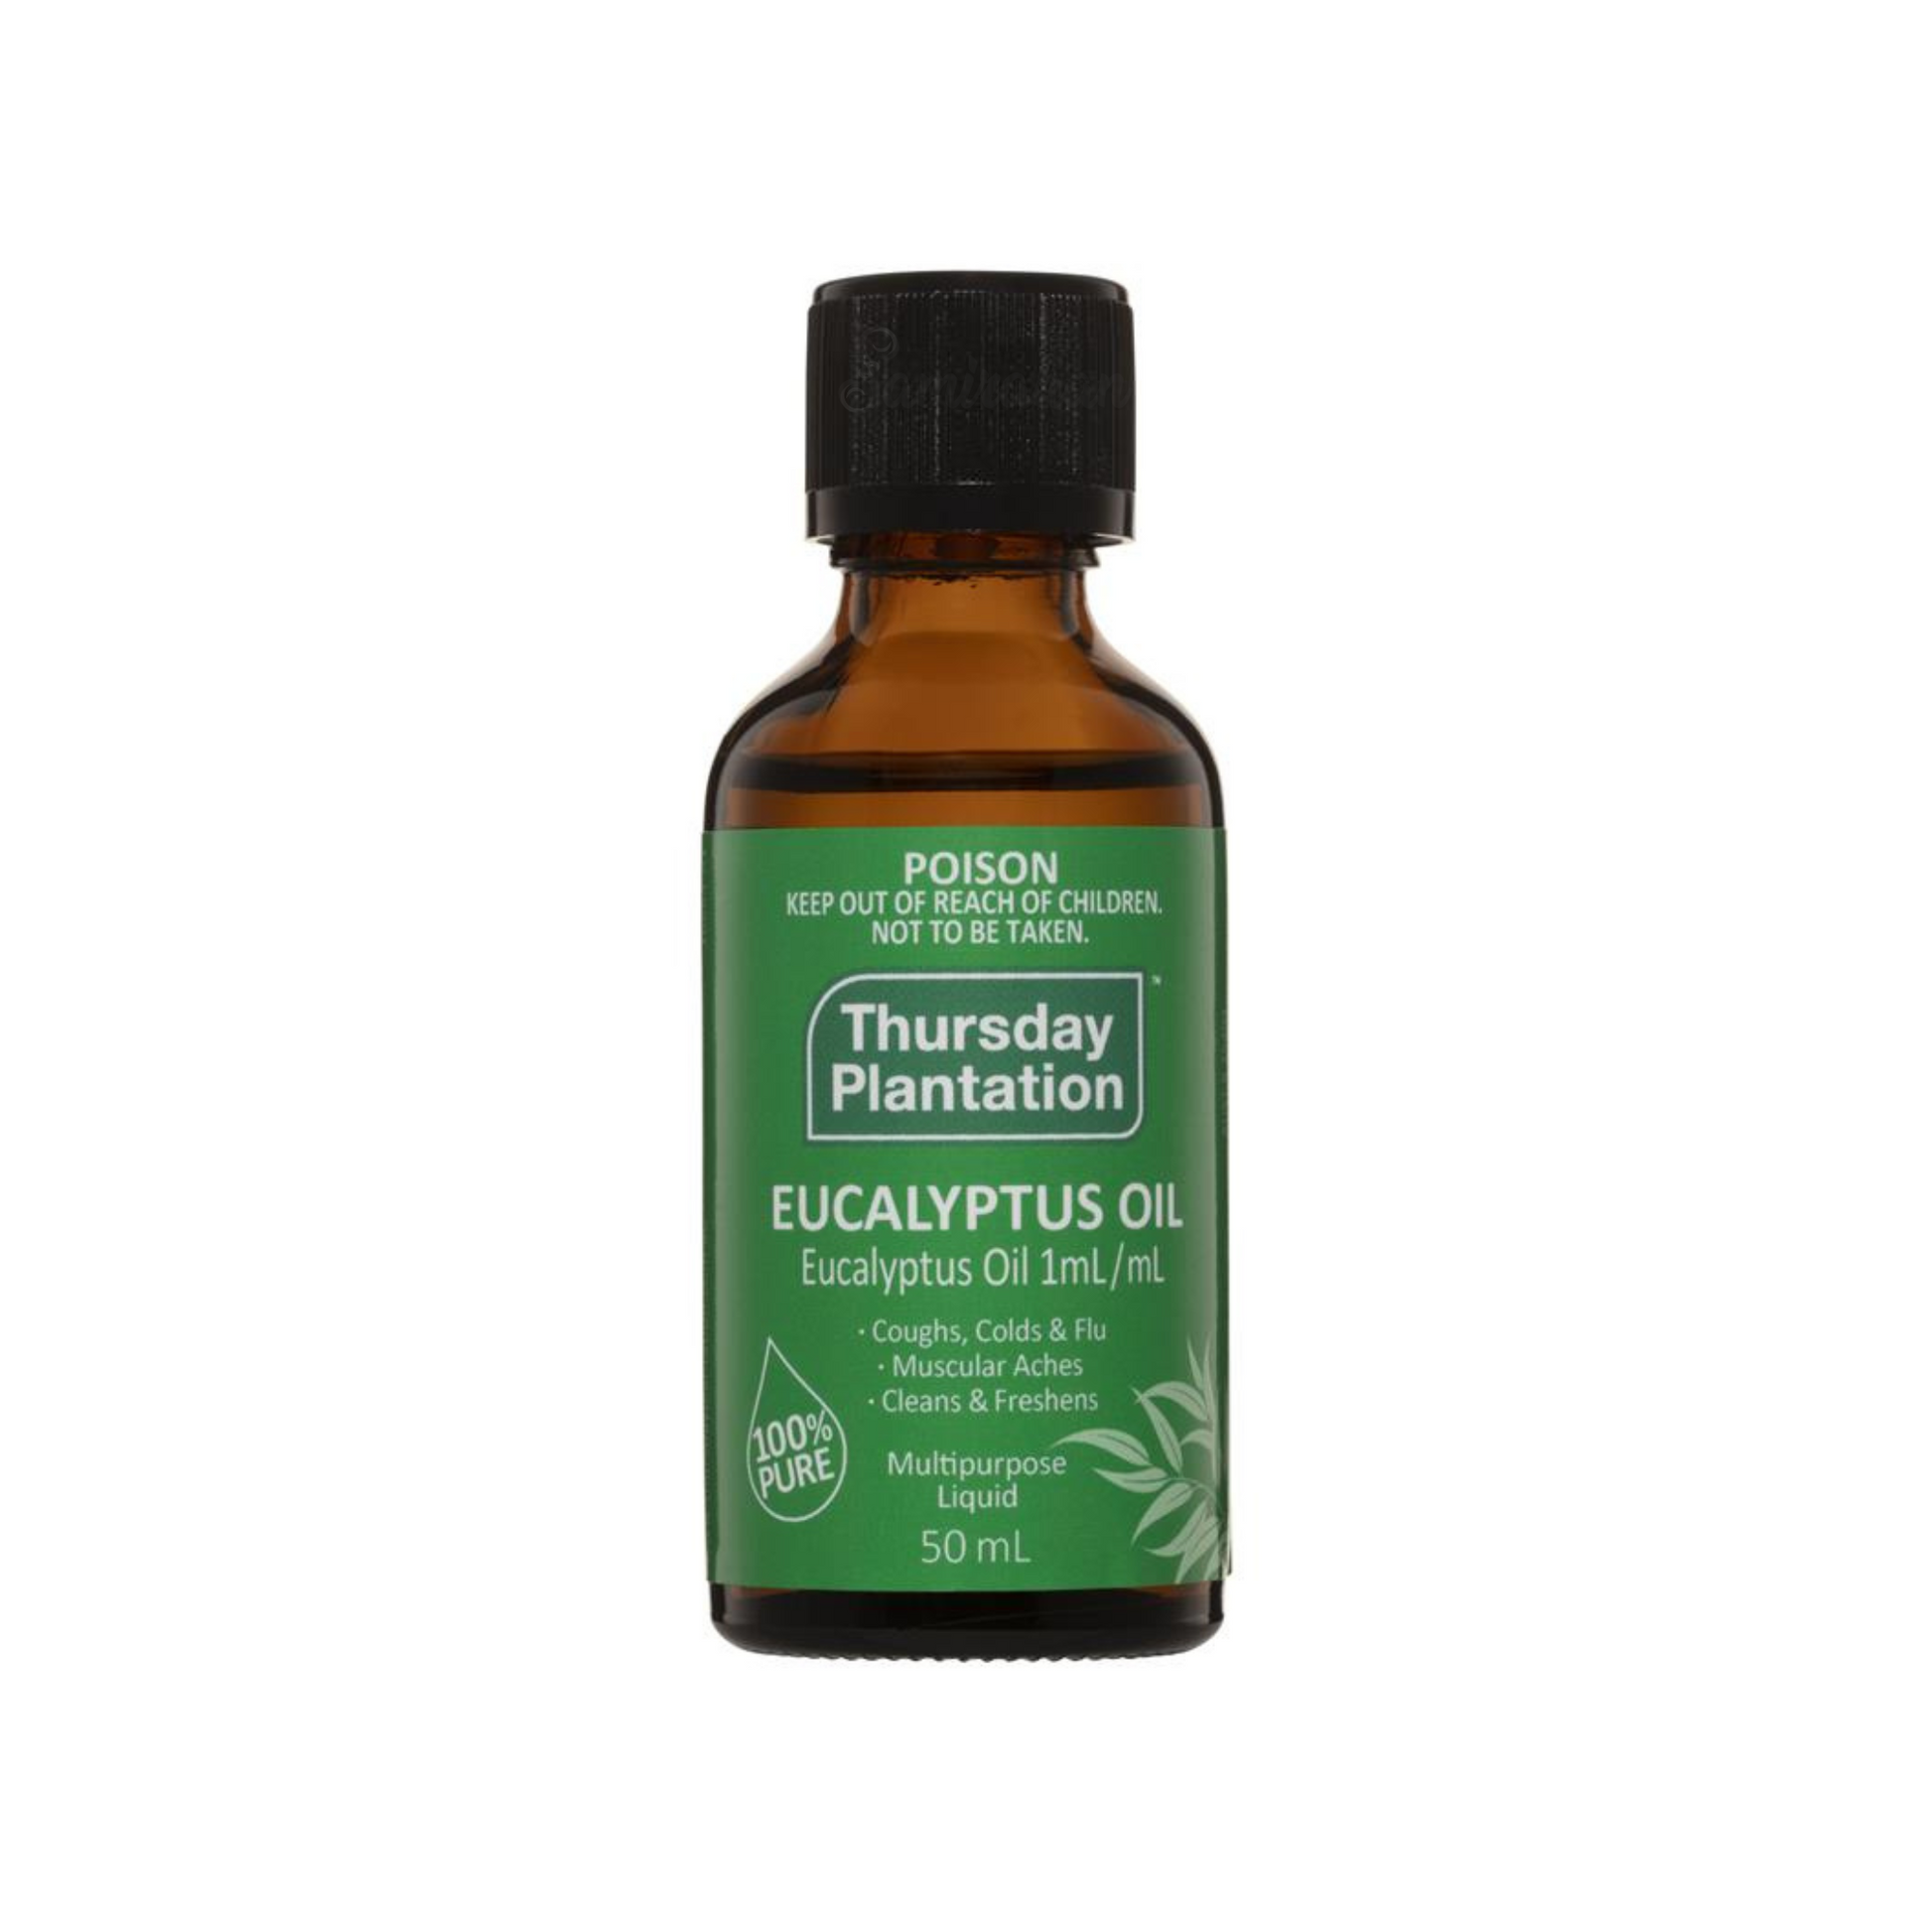 Thursday Plantation 100% Pure Eucalyptus Oil is a pharmaceutical grade essential oil. Suitable for coughs, colds & flu. Helps relax muscular tensions and stiffness. Multipurpose cleaning liquid. Best authentic genuine real imported foreign premium  herbal essential oils Australia Aussie cheap price in Dhaka Bangladesh.